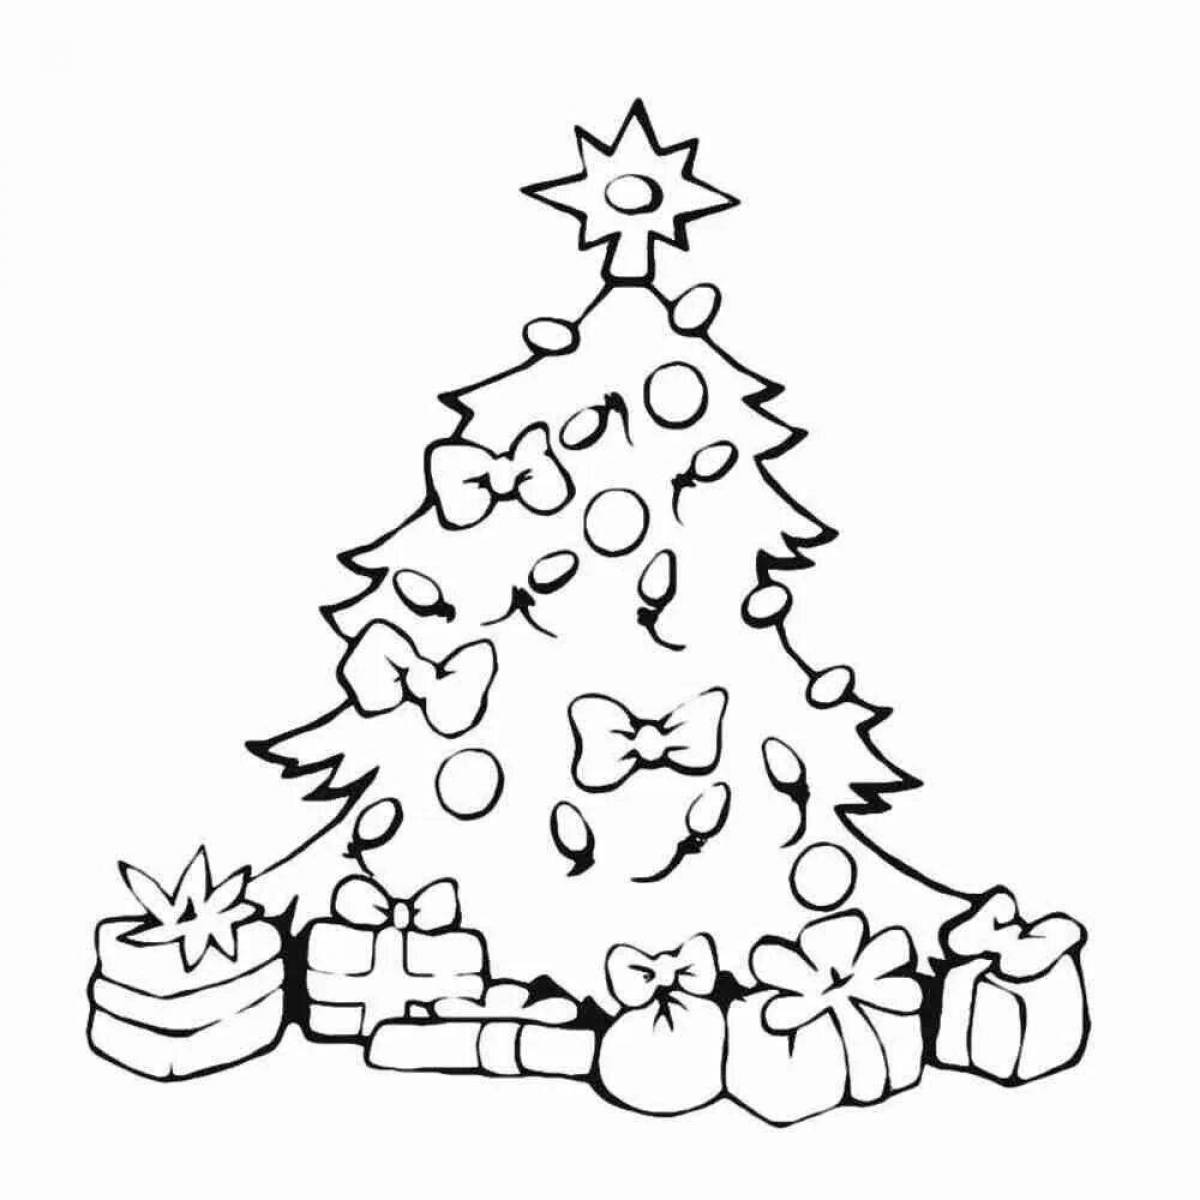 Coloring book shiny children's tree